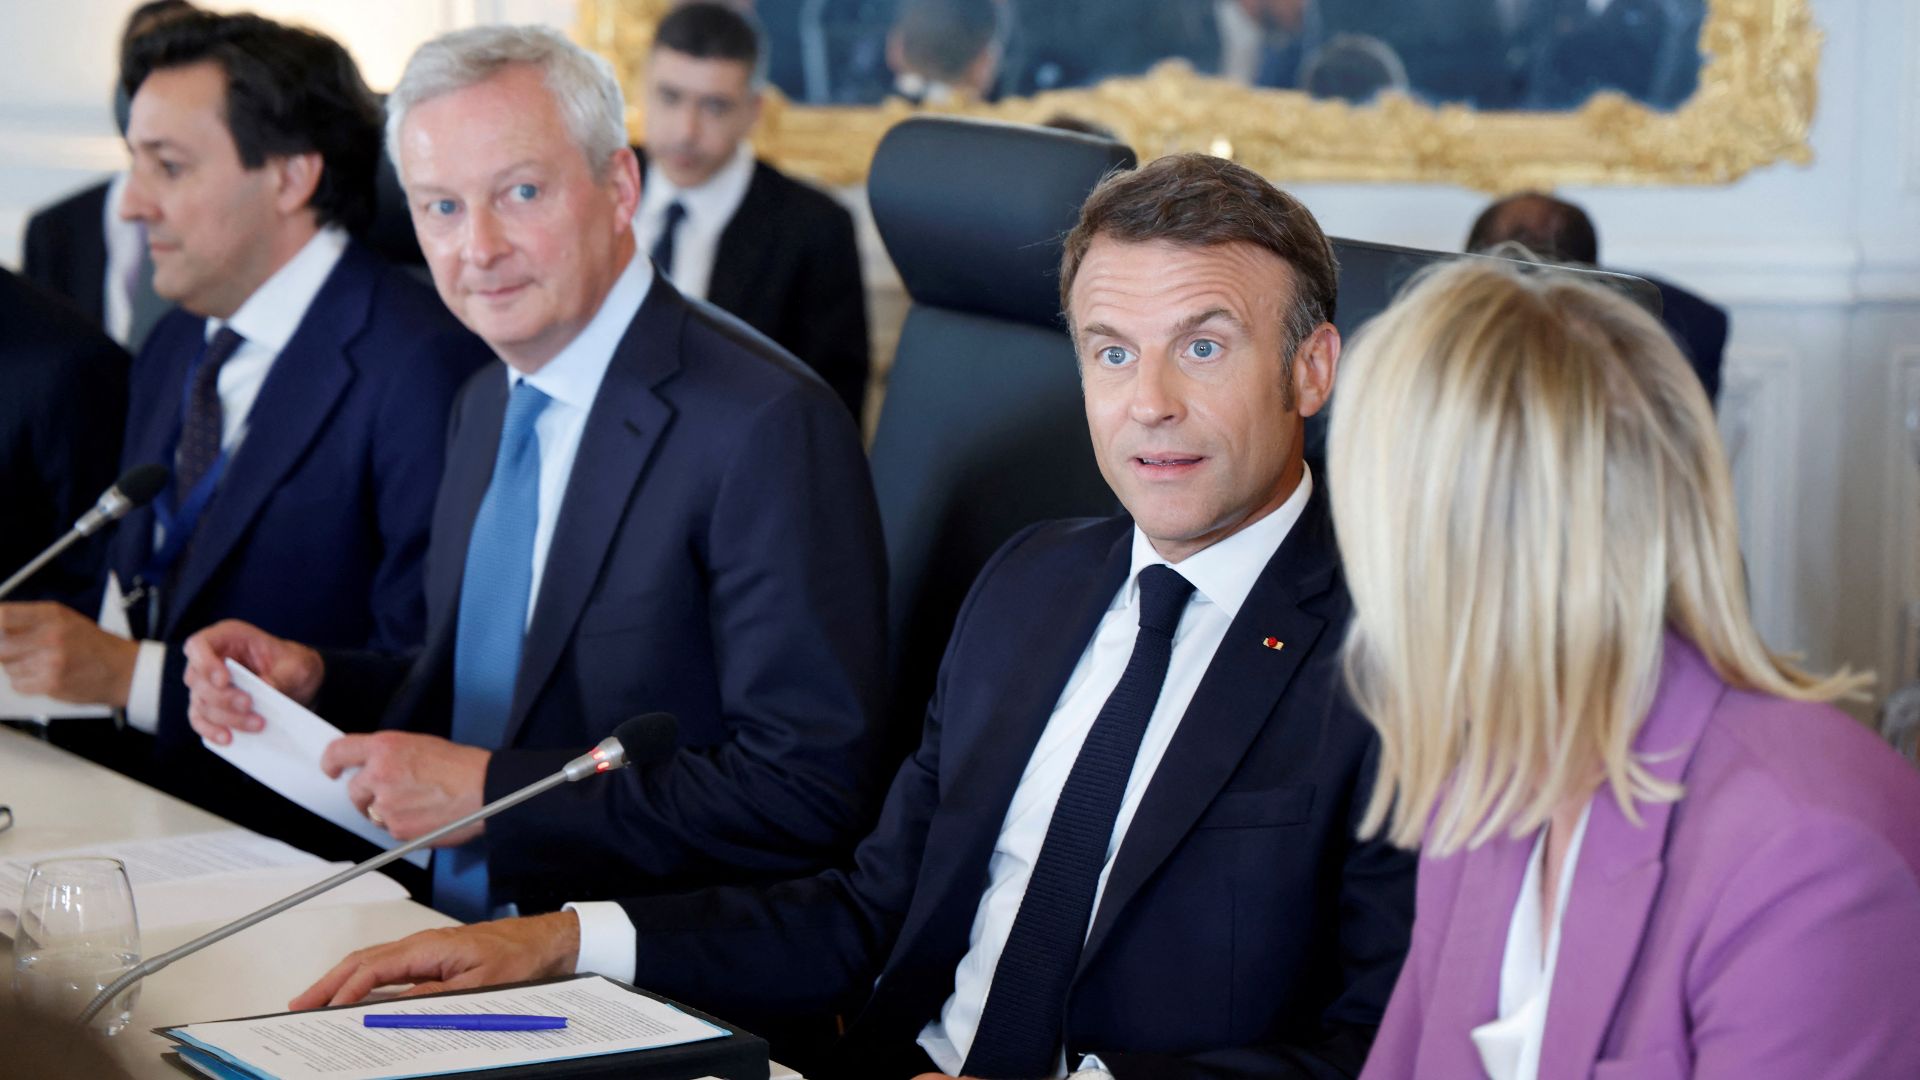 French President Emmanuel Macron (2nd right) and Economy Minister Bruno Le Maire (2nd left) at the Choose France Summit. /Ludovic Marin/Pool via Reuters